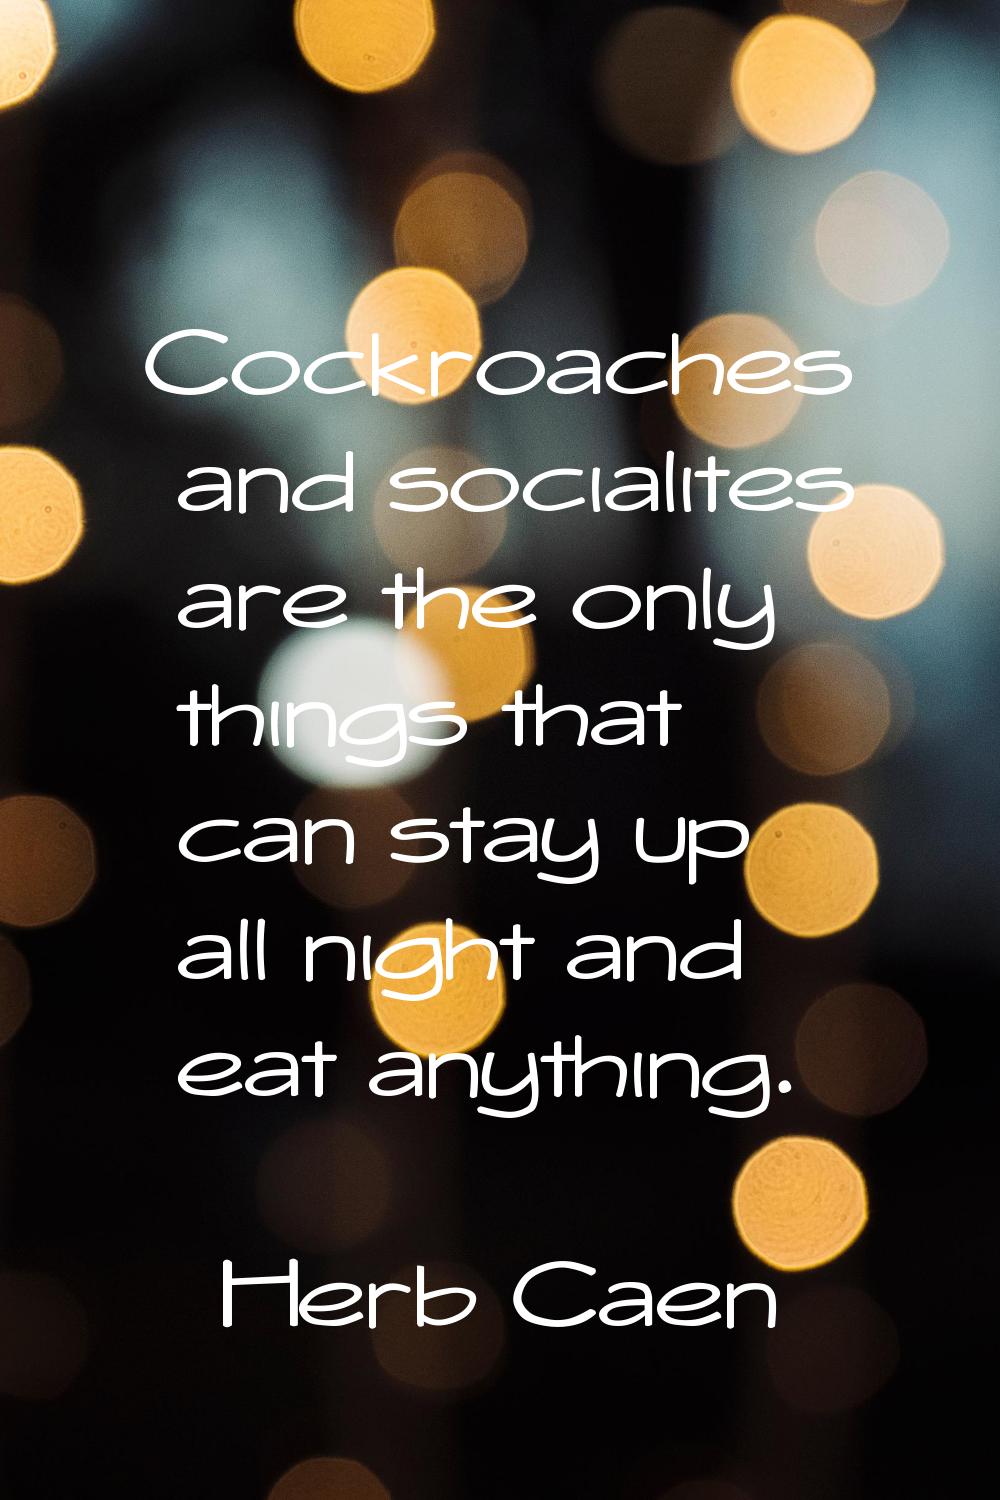 Cockroaches and socialites are the only things that can stay up all night and eat anything.